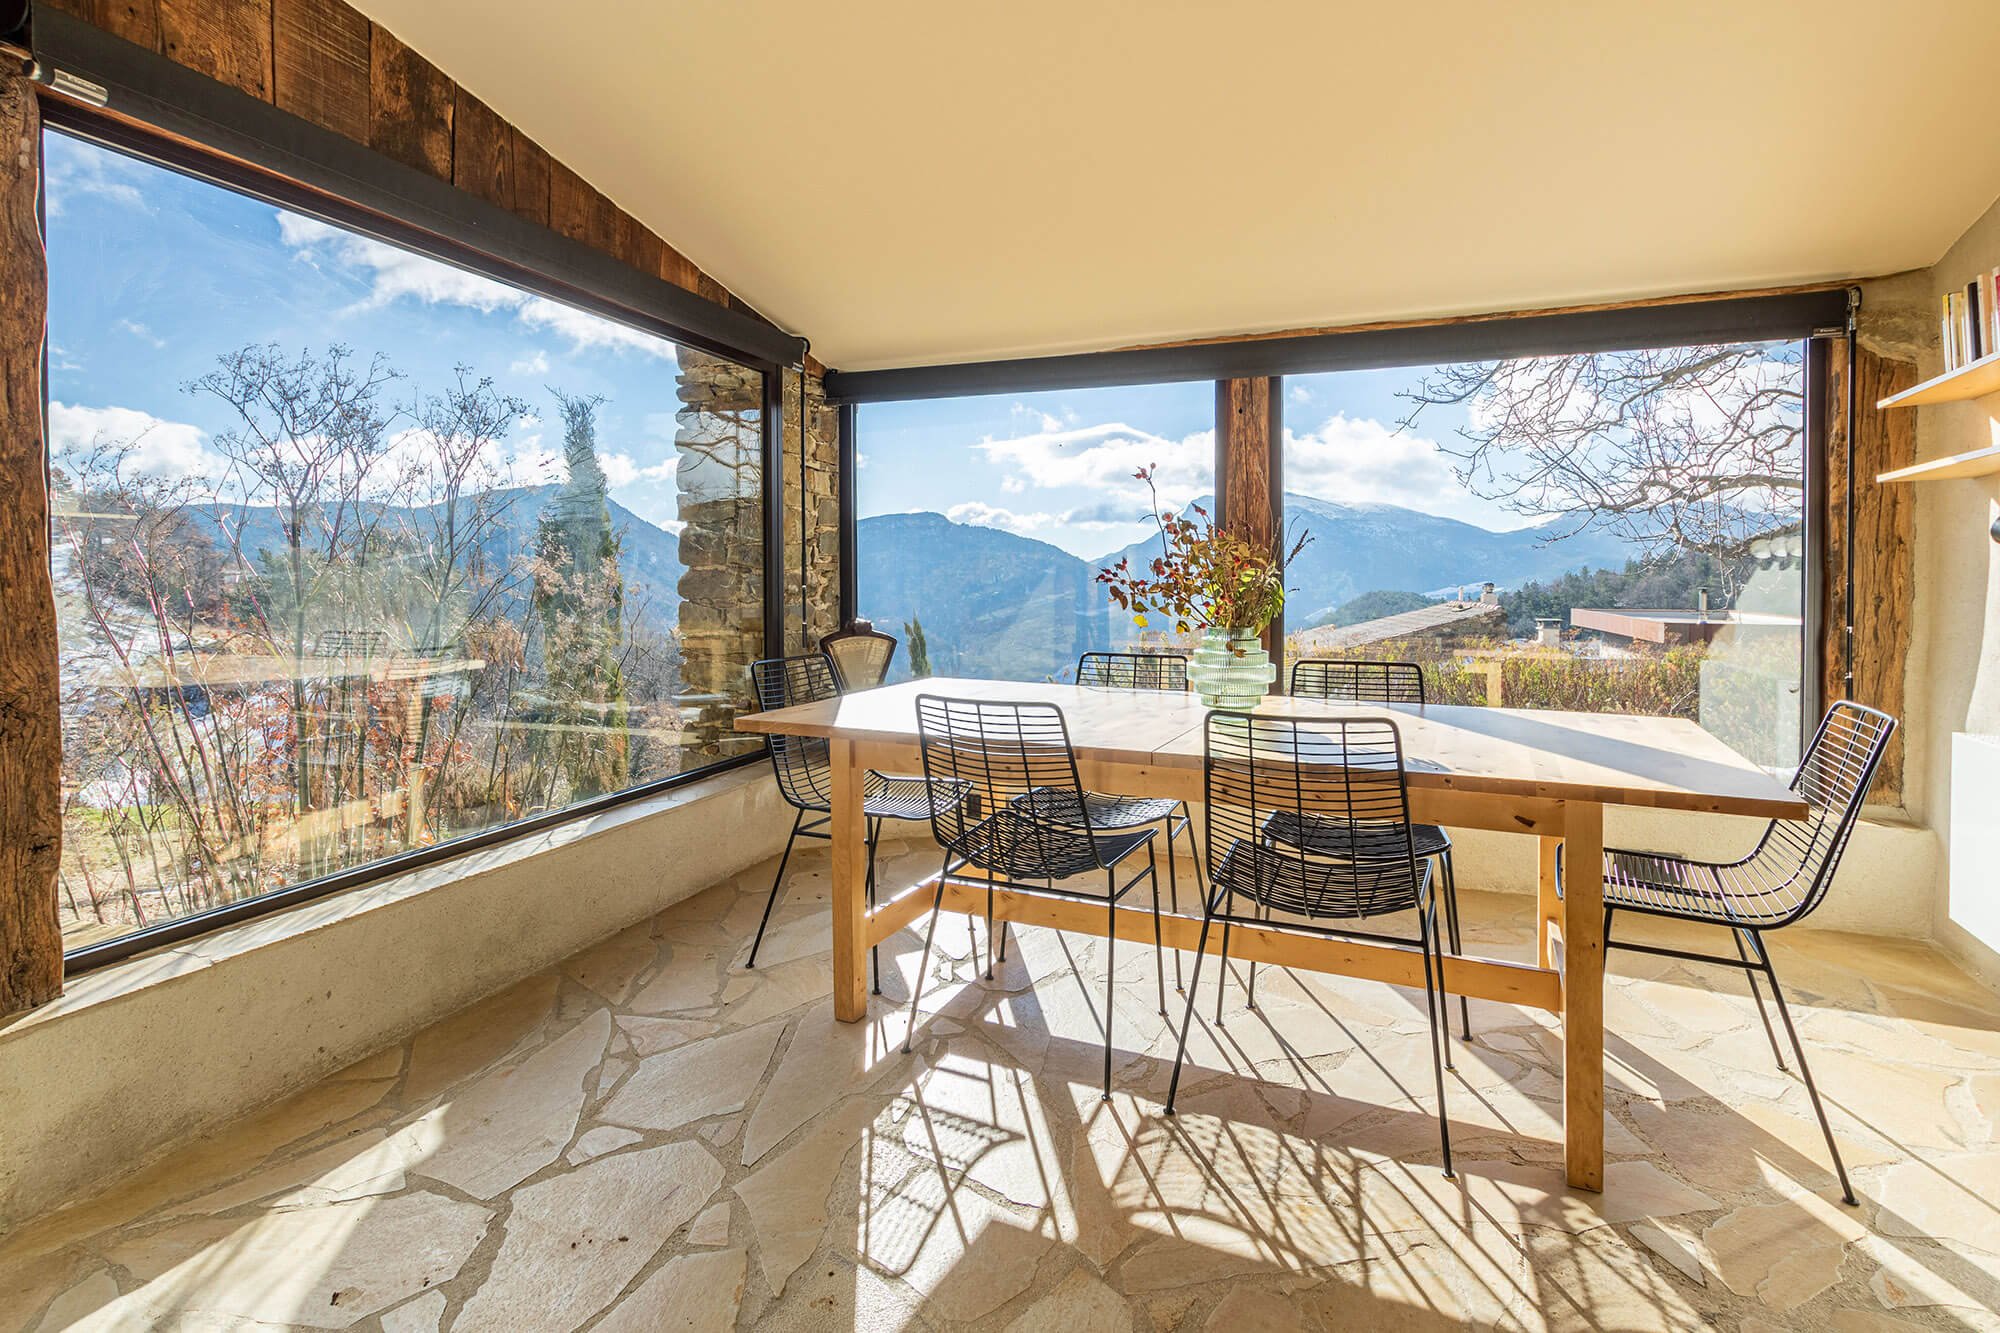 Luxurious, eco-friendly home for your seminar in Drôme provençale in the South of France